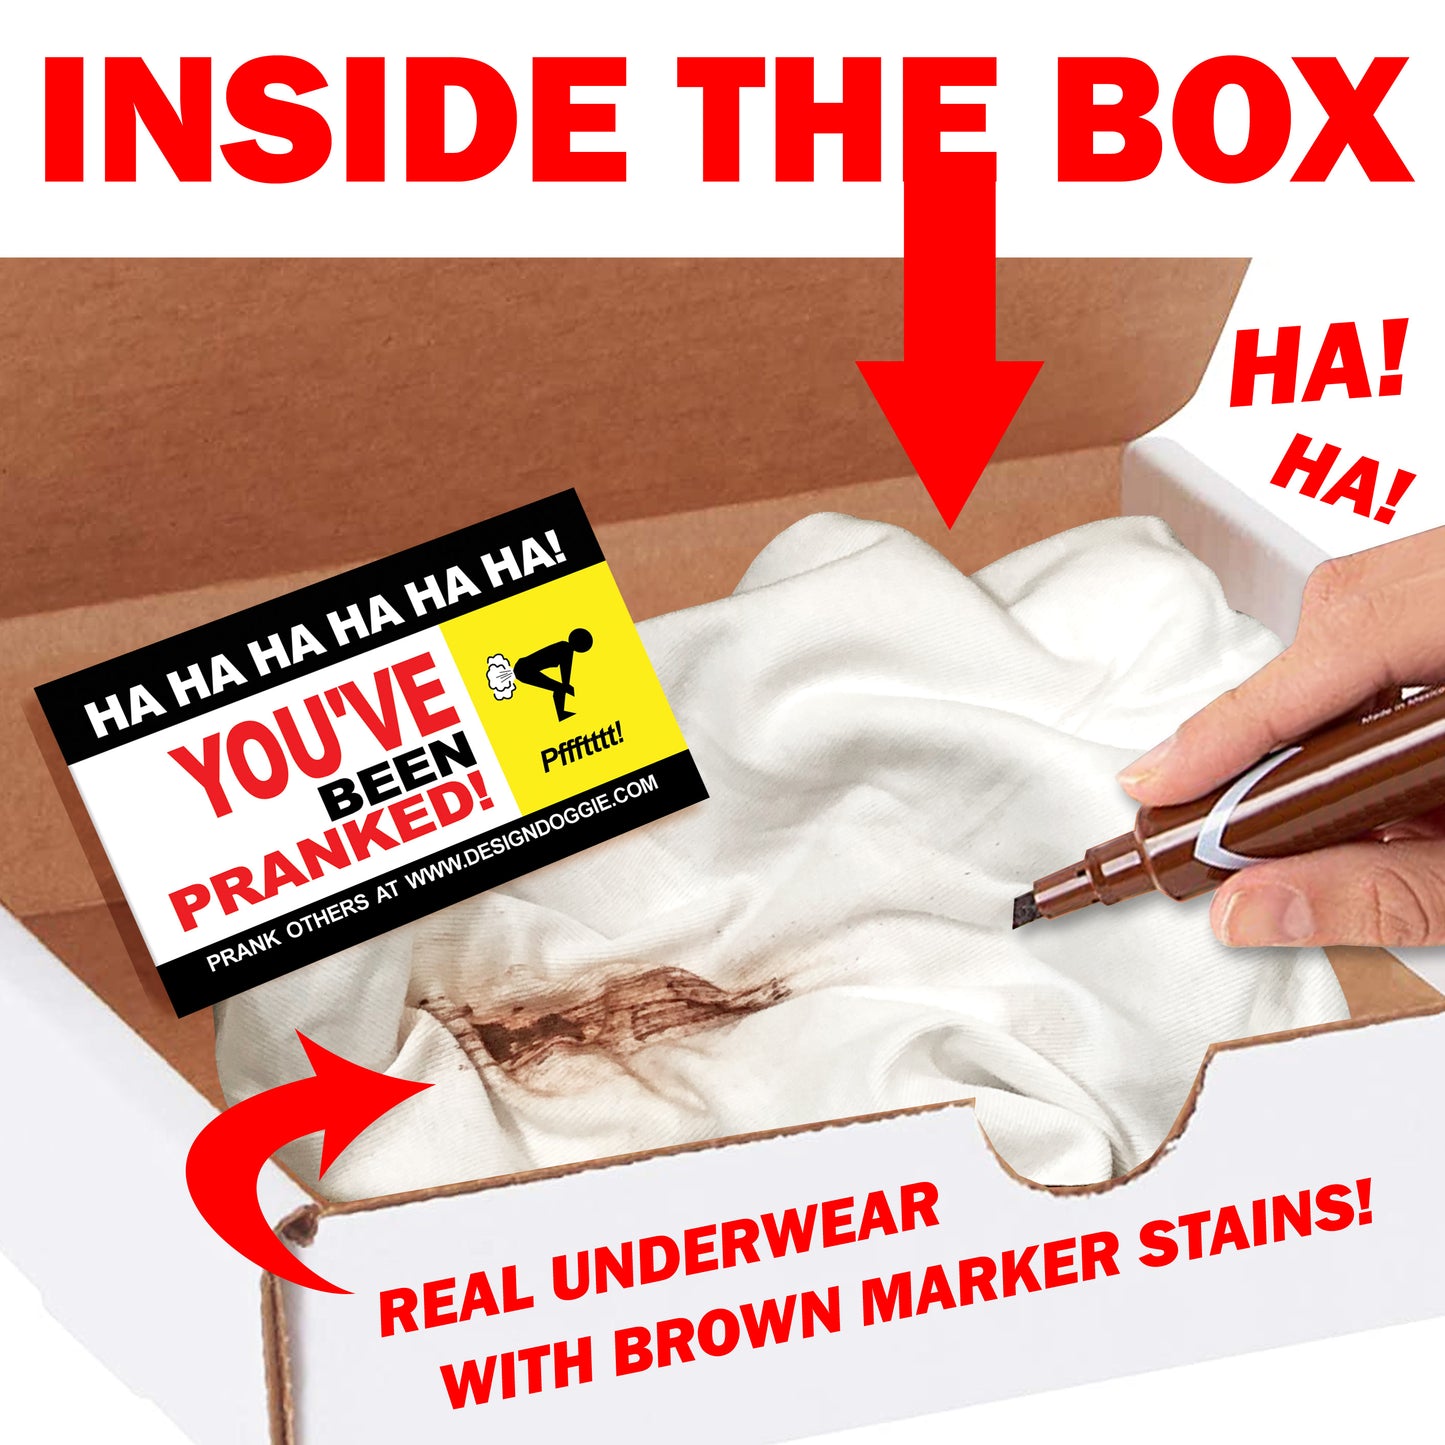 Sniff My Skidmark embarrassing prank box gets mailed directly to your victims 100% anonymously!